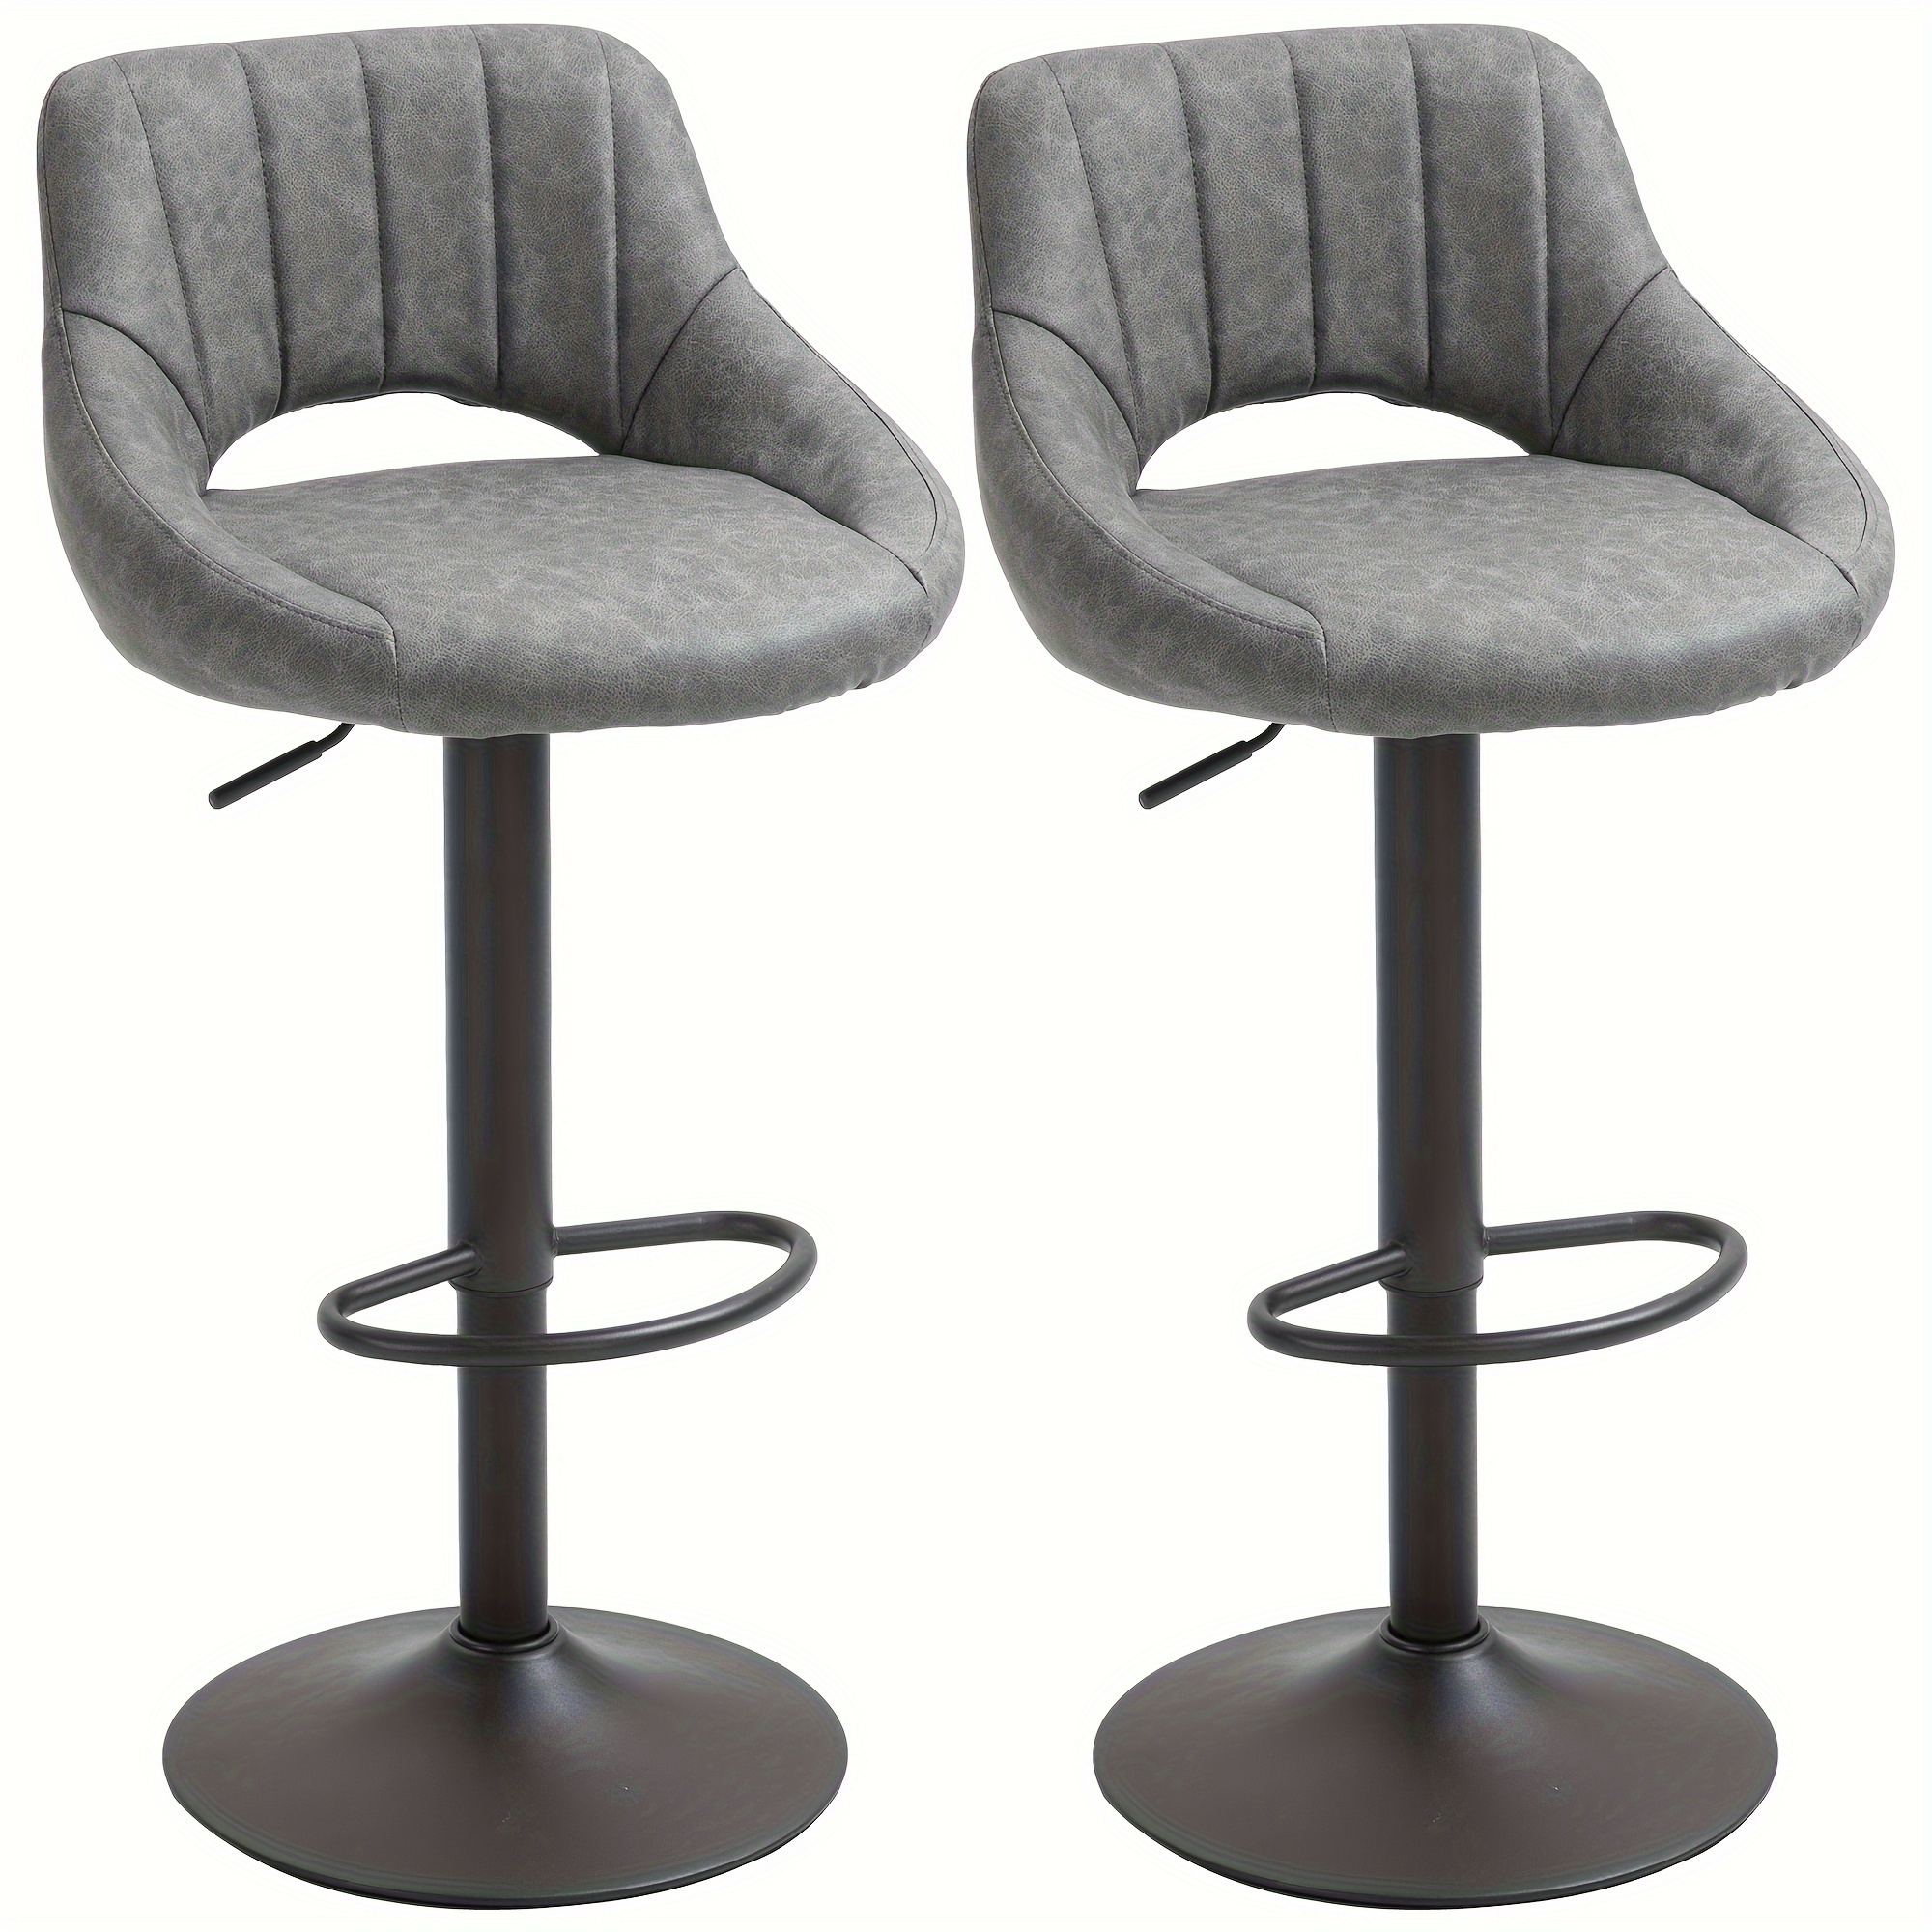 

Bar Stools Set Of 2, Swivel Bar Height Barstools Chairs With Adjustable Height, Round Heavy Metal Base, And Footrest, Gray